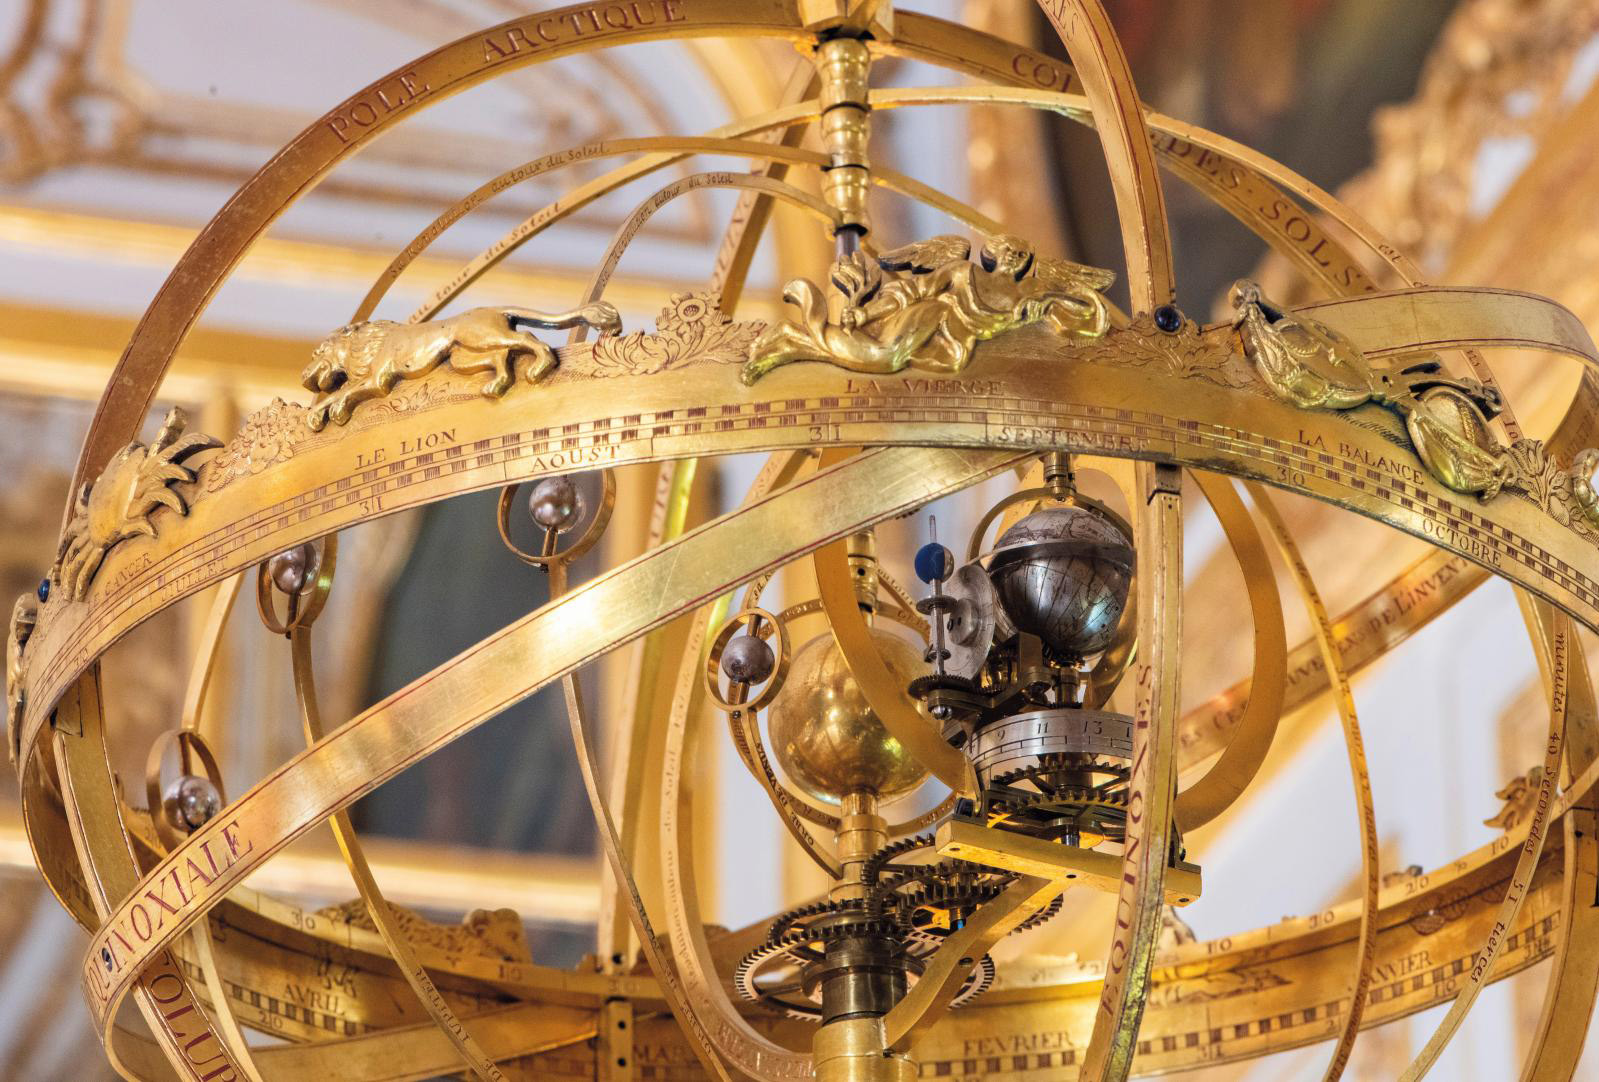 The clock’s solar system with the signs of the zodiac.© Château de Versailles, T. Garnier